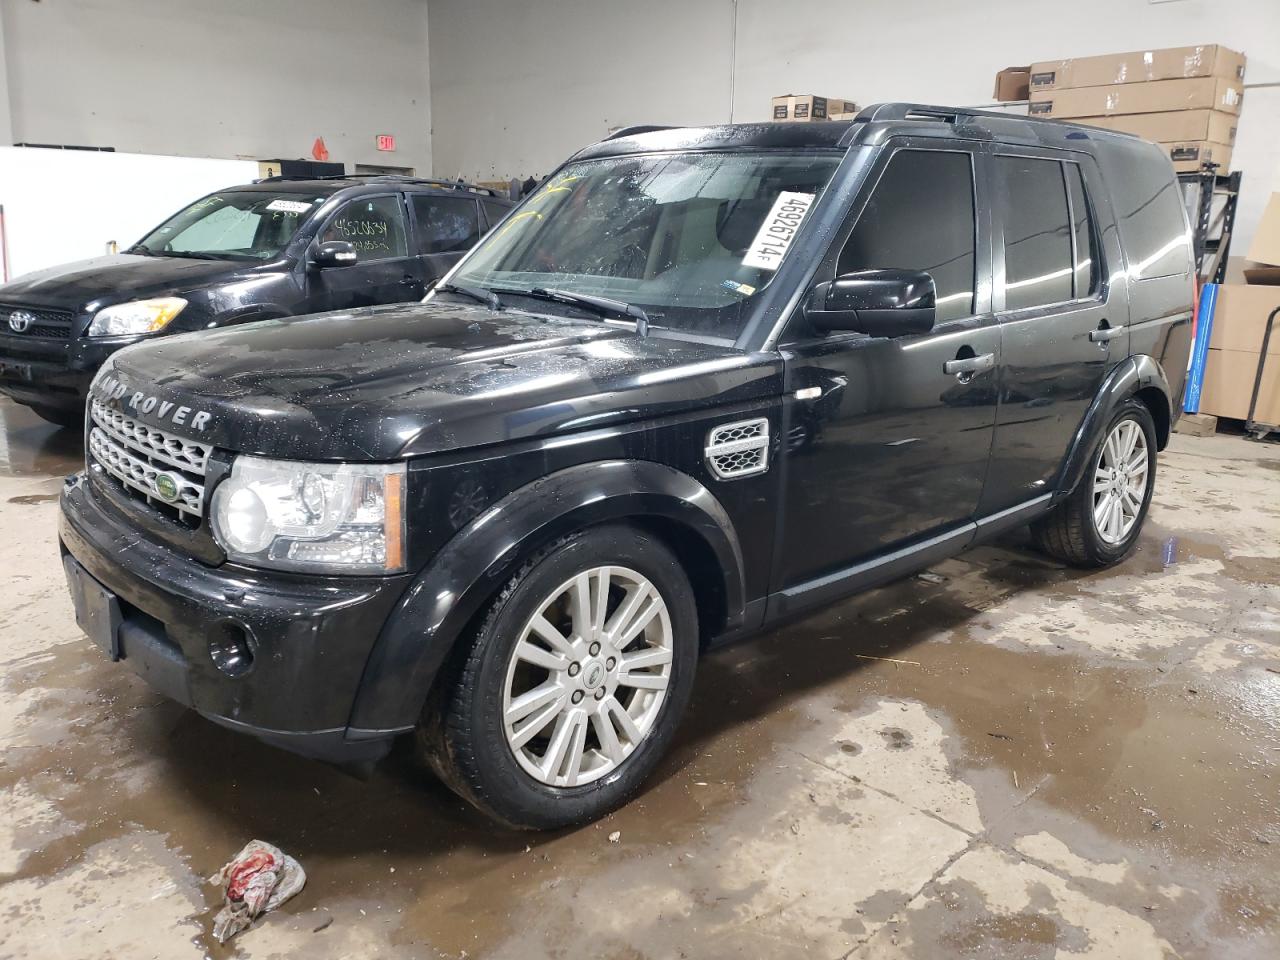 vin: SALAK2D47AA541073 SALAK2D47AA541073 2010 land rover lr4 5000 for Sale in 60120 7419, Il - Chicago North, Elgin, USA